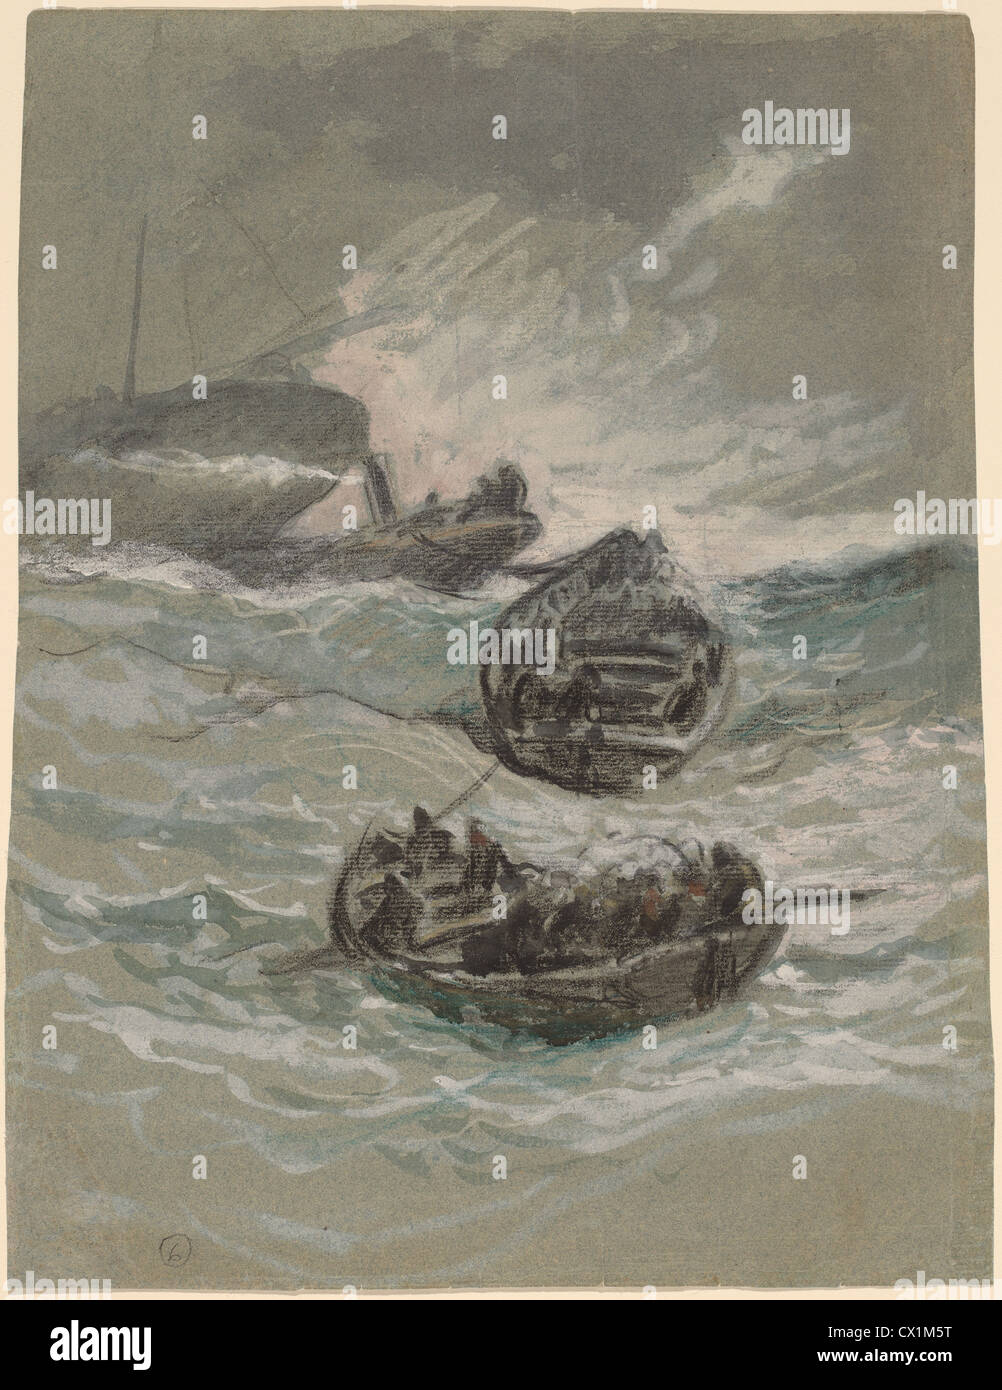 Elihu Vedder, The Shipwreck, American, 1836 - 1923, c. 1880, charcoal, watercolor, and gouache on blue laid paper Stock Photo